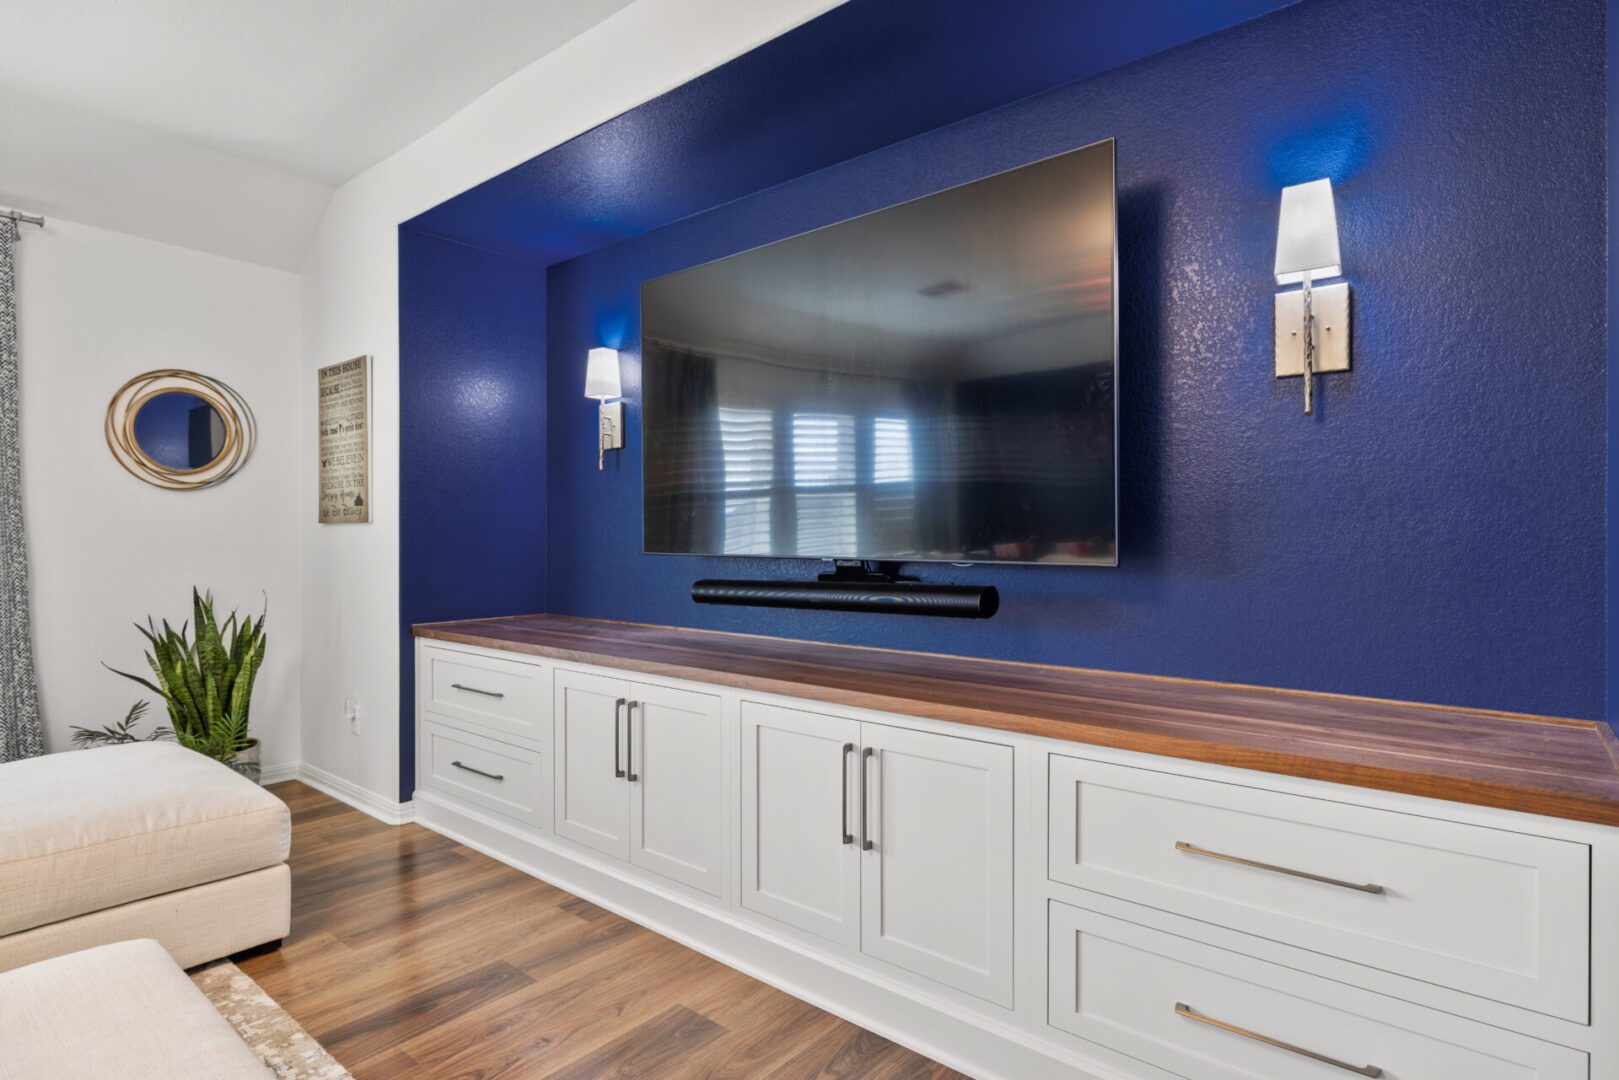 LED TV on a blue color wall with lights